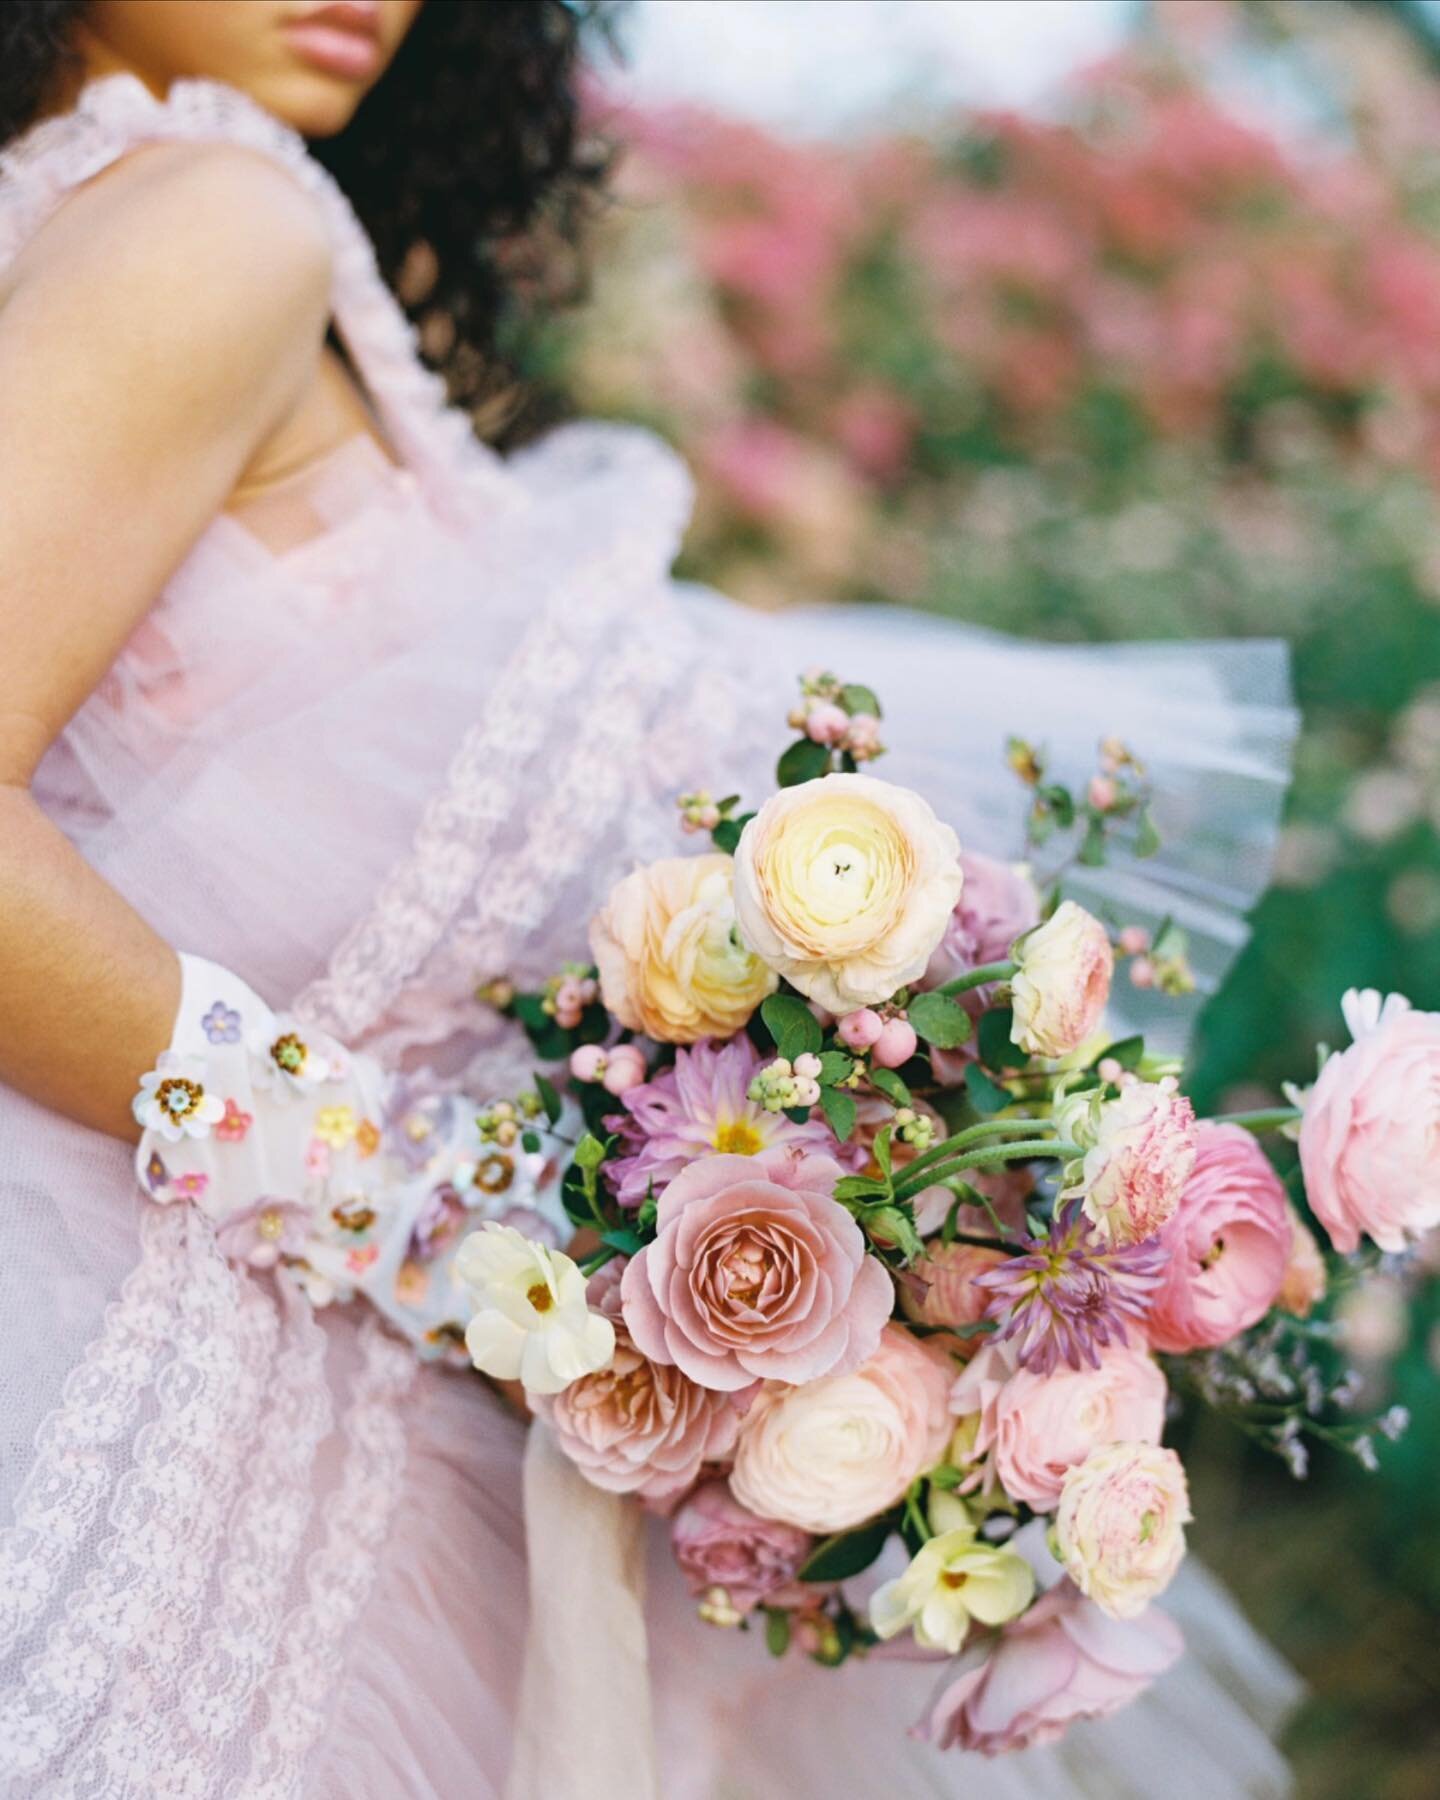 When one shot has it all... garden roses, ranunculus, a lilac tulle gown, colorful floral appliqu&eacute; gloves, hand died silk ribbon and perfect light. This shot from last year has to be one of my all time favs with an incredible team to make it h